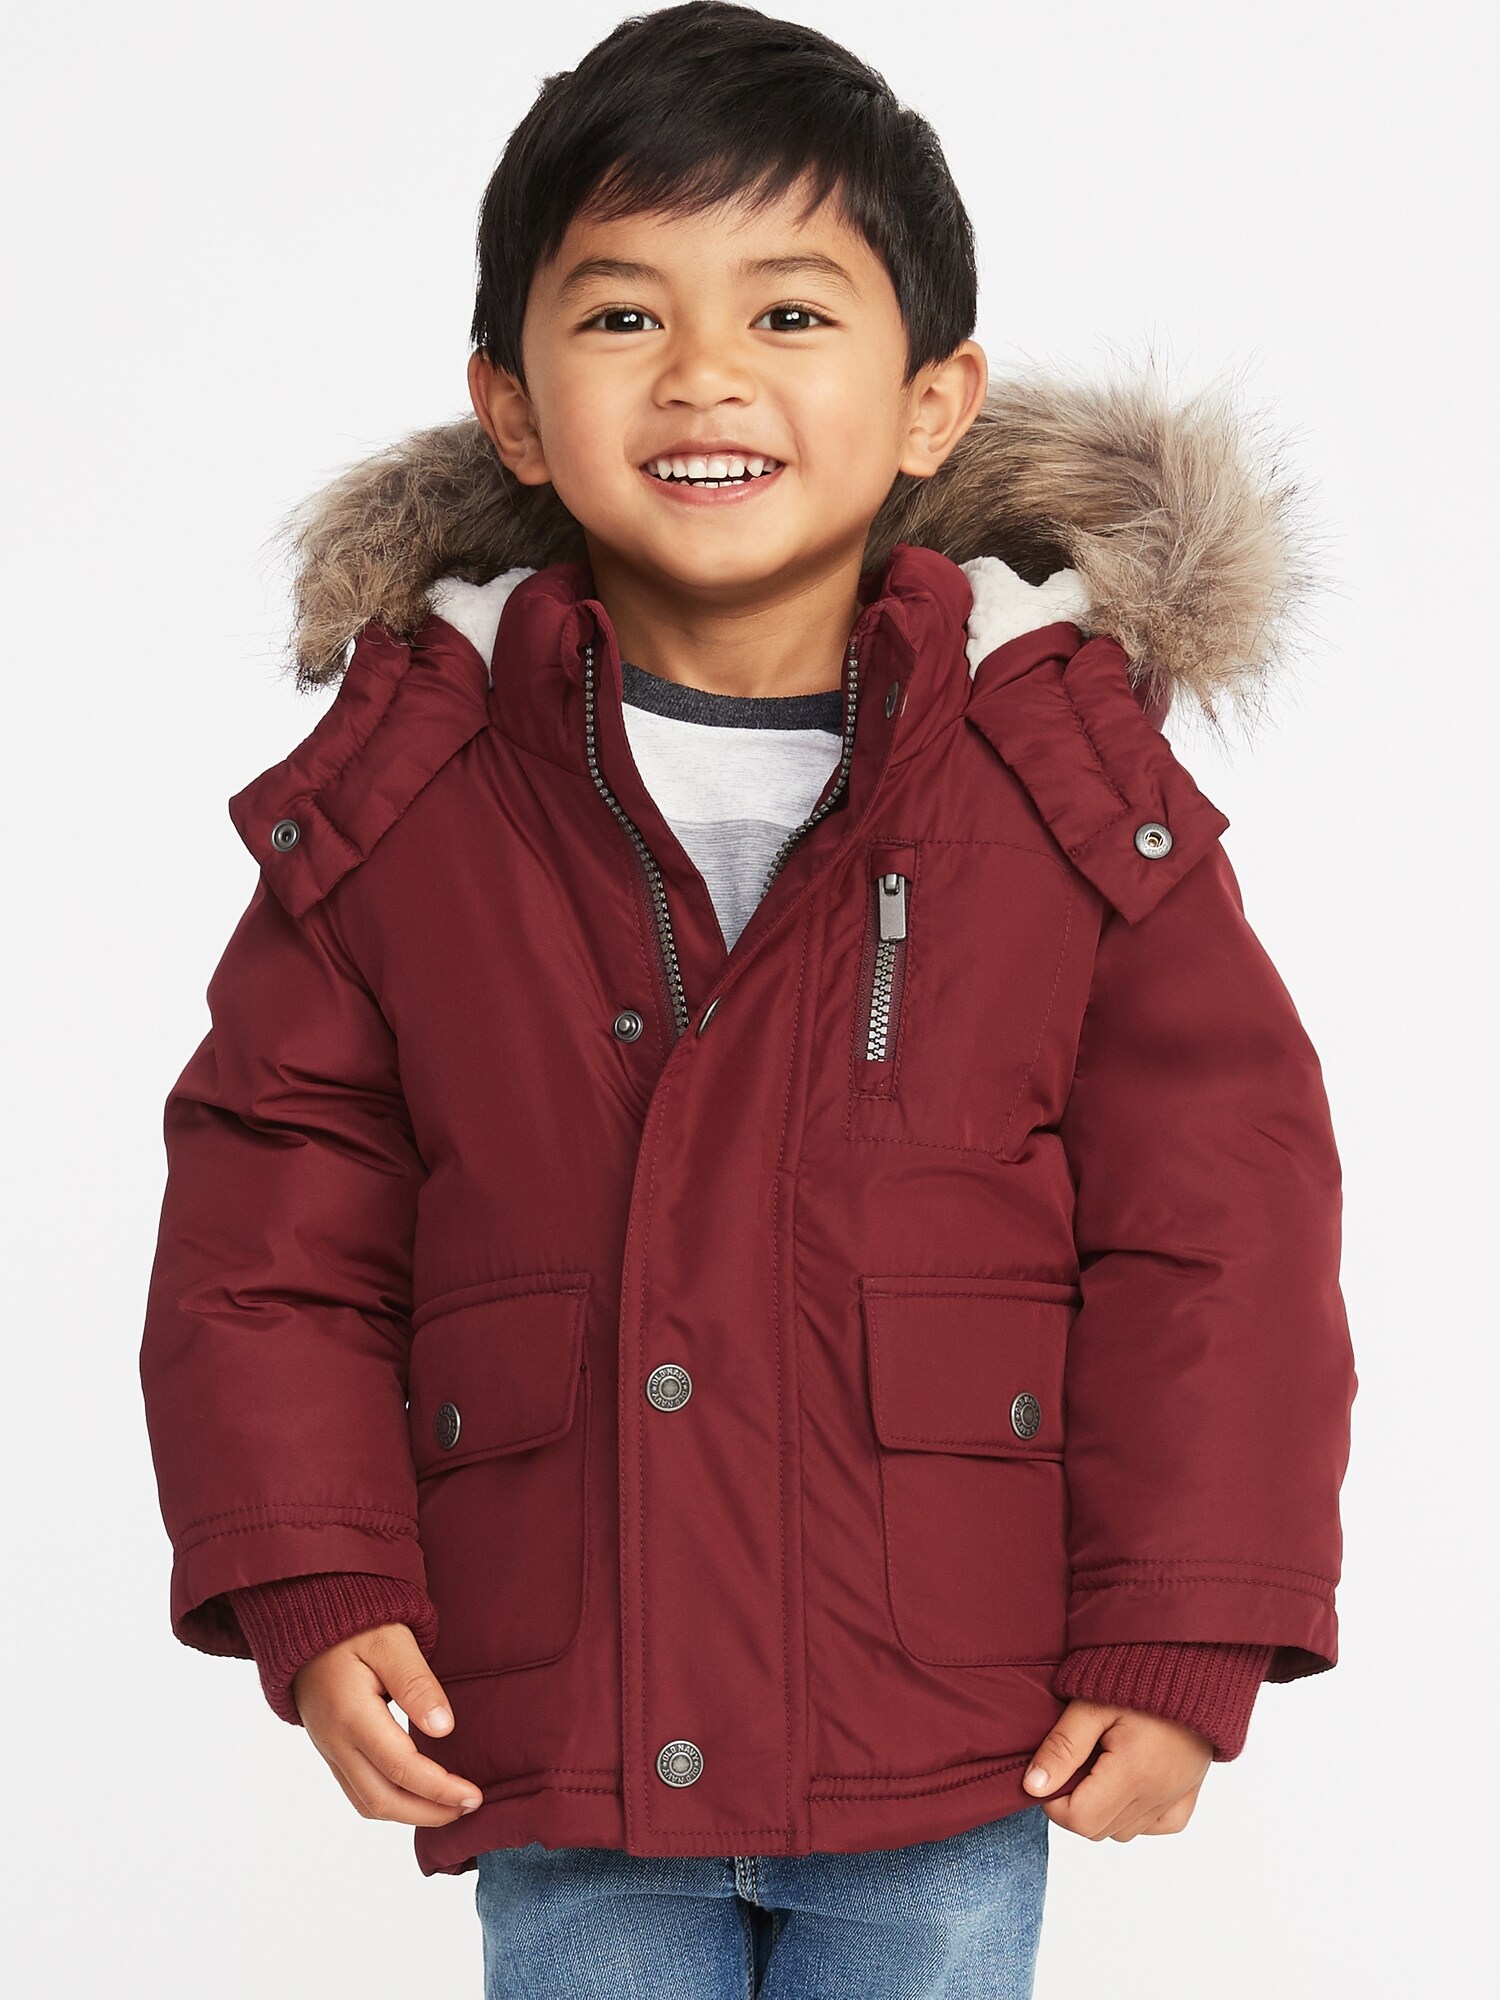 Hooded Faux-Fur Trim Snow Jacket for Toddler Boys | Old Navy